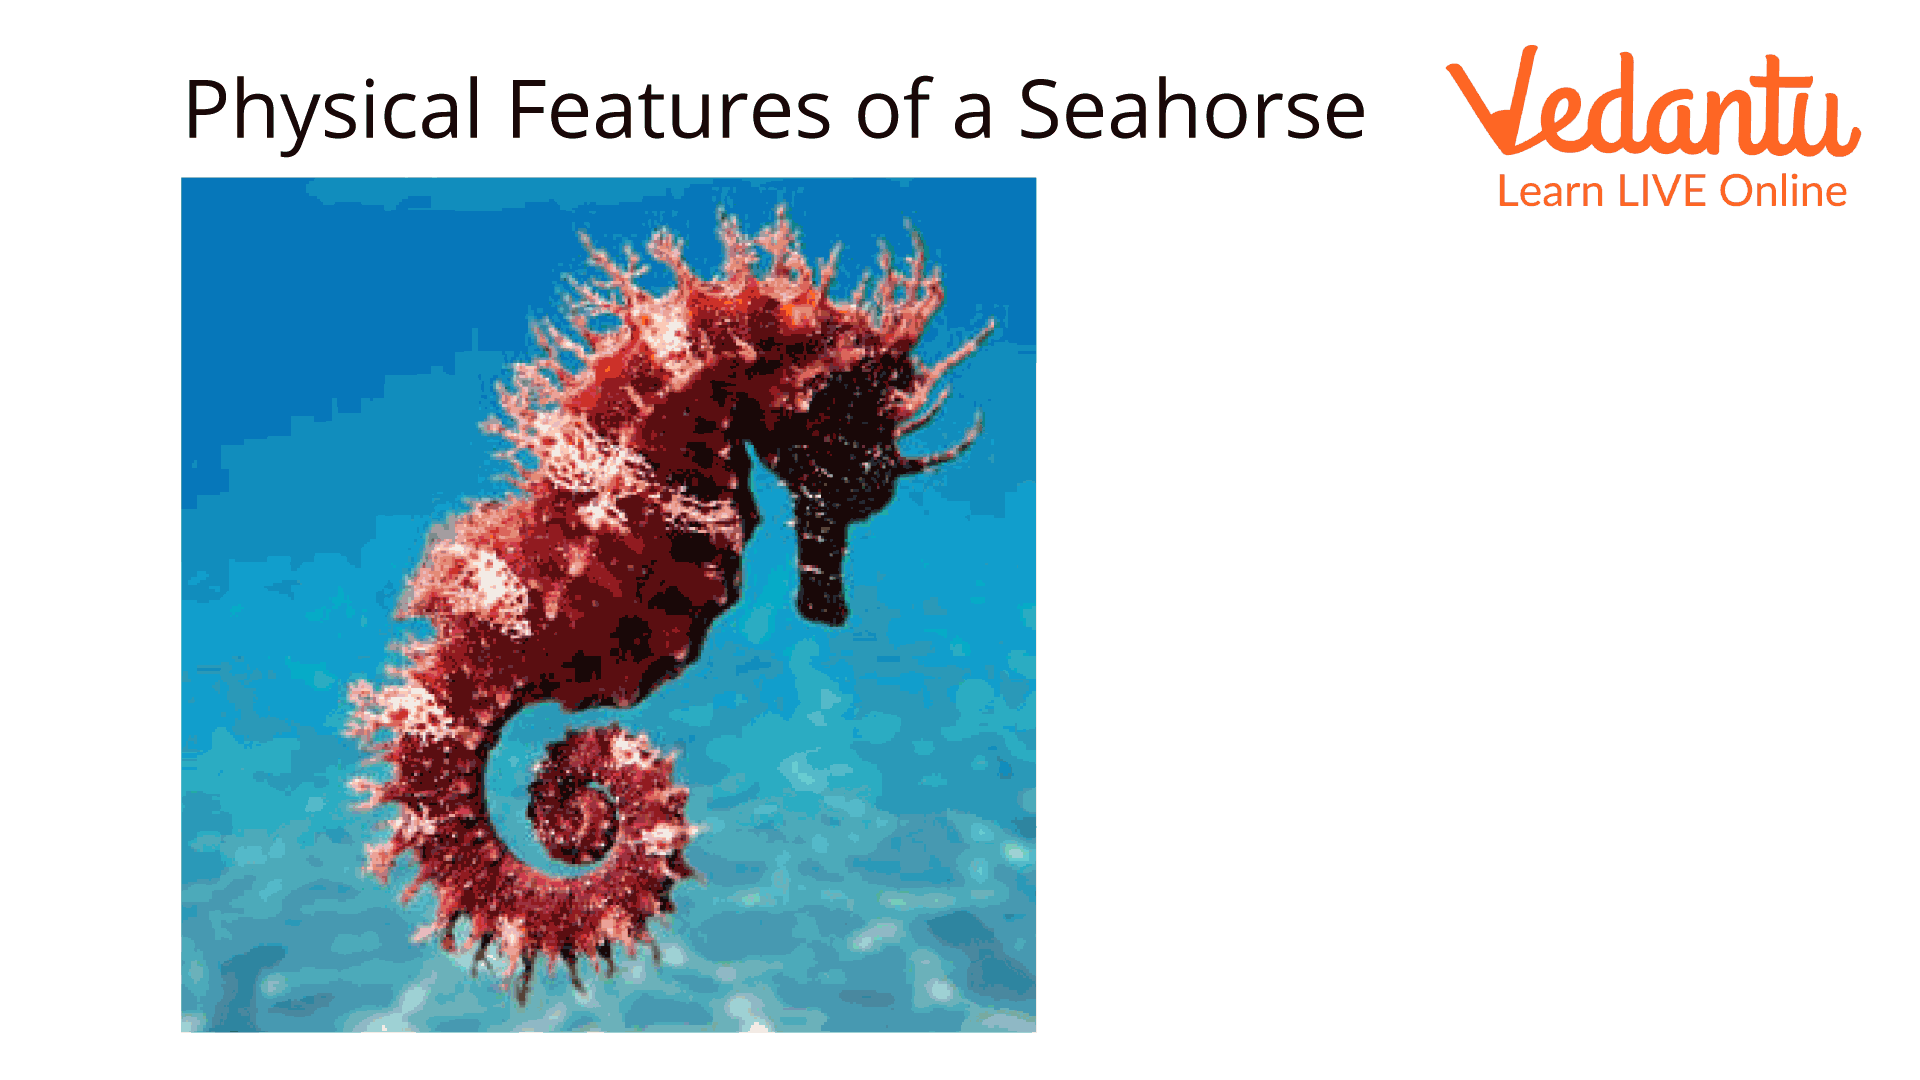 Physical Features of a Seahorse